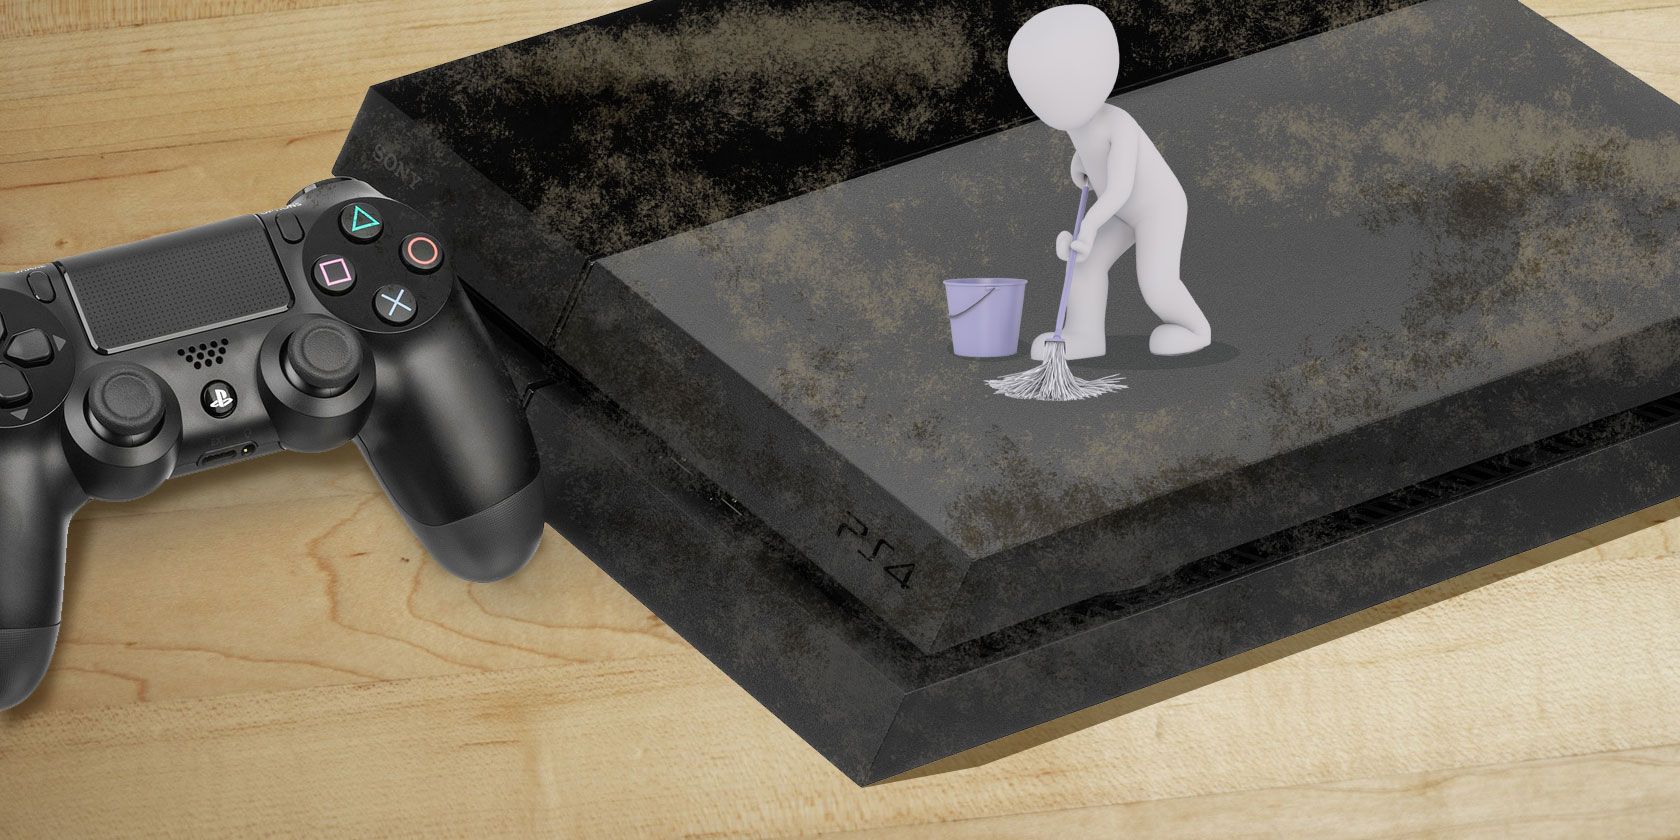 Unplug the PS3 and place it on a clean, flat surface.
Use a can of compressed air to blow out any dust or debris from the vents and fan.